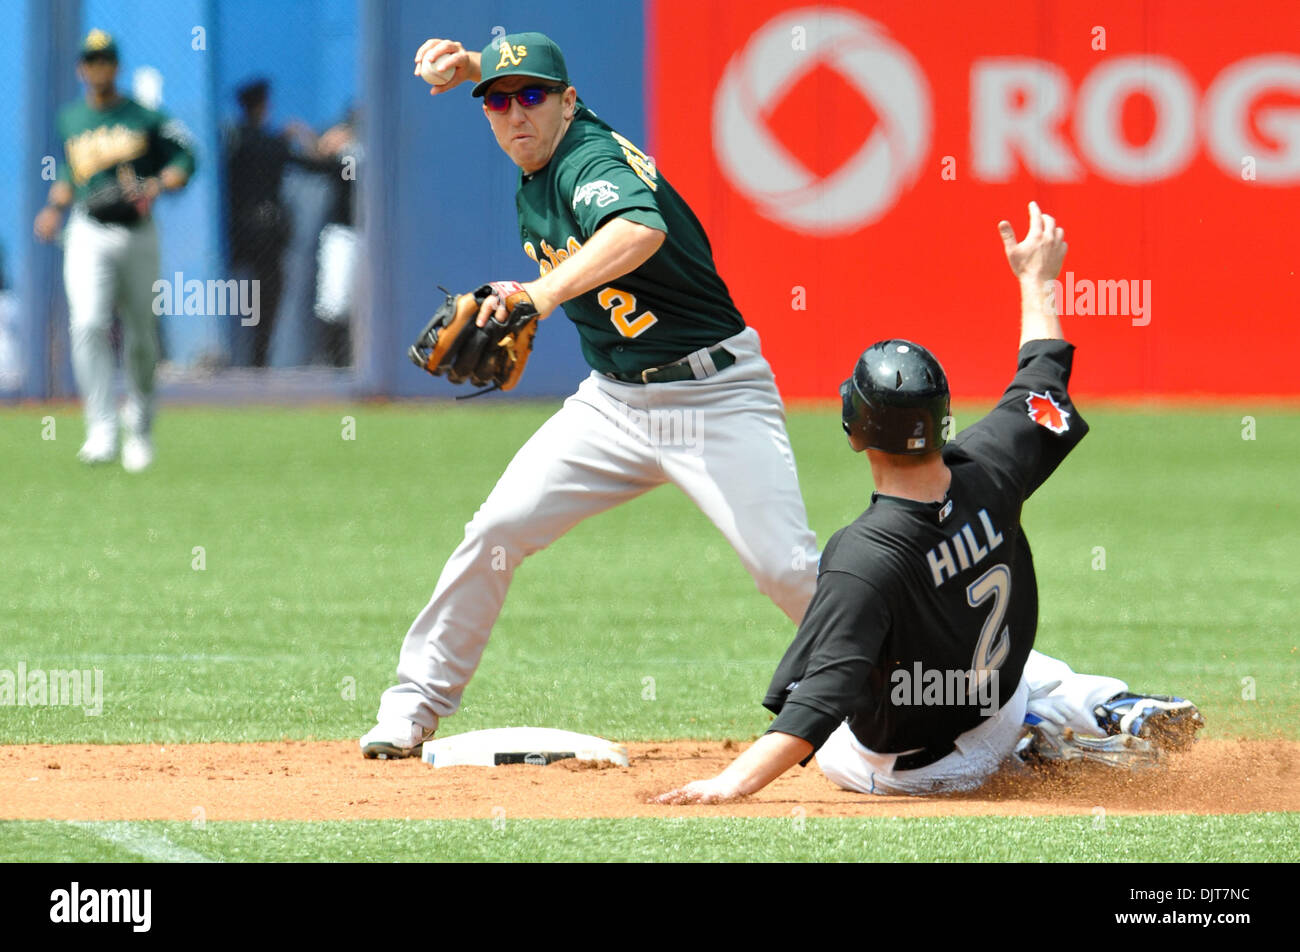 May 02, 2010 - Toronto, Ontario, Canada - 2 May 2010: Oakland Athletics' second basemen Cliff Pennington (2) turns the double play as Toronto Blue Jays second baseman Aaron Hill (2) slides under during game action. The Blue Jays defeated the Athletics 9-3 at the Rogers Centre in Toronto, Ontario. (Credit Image: © Adrian Gauthier/Southcreek Global/ZUMApress.com) Stock Photo